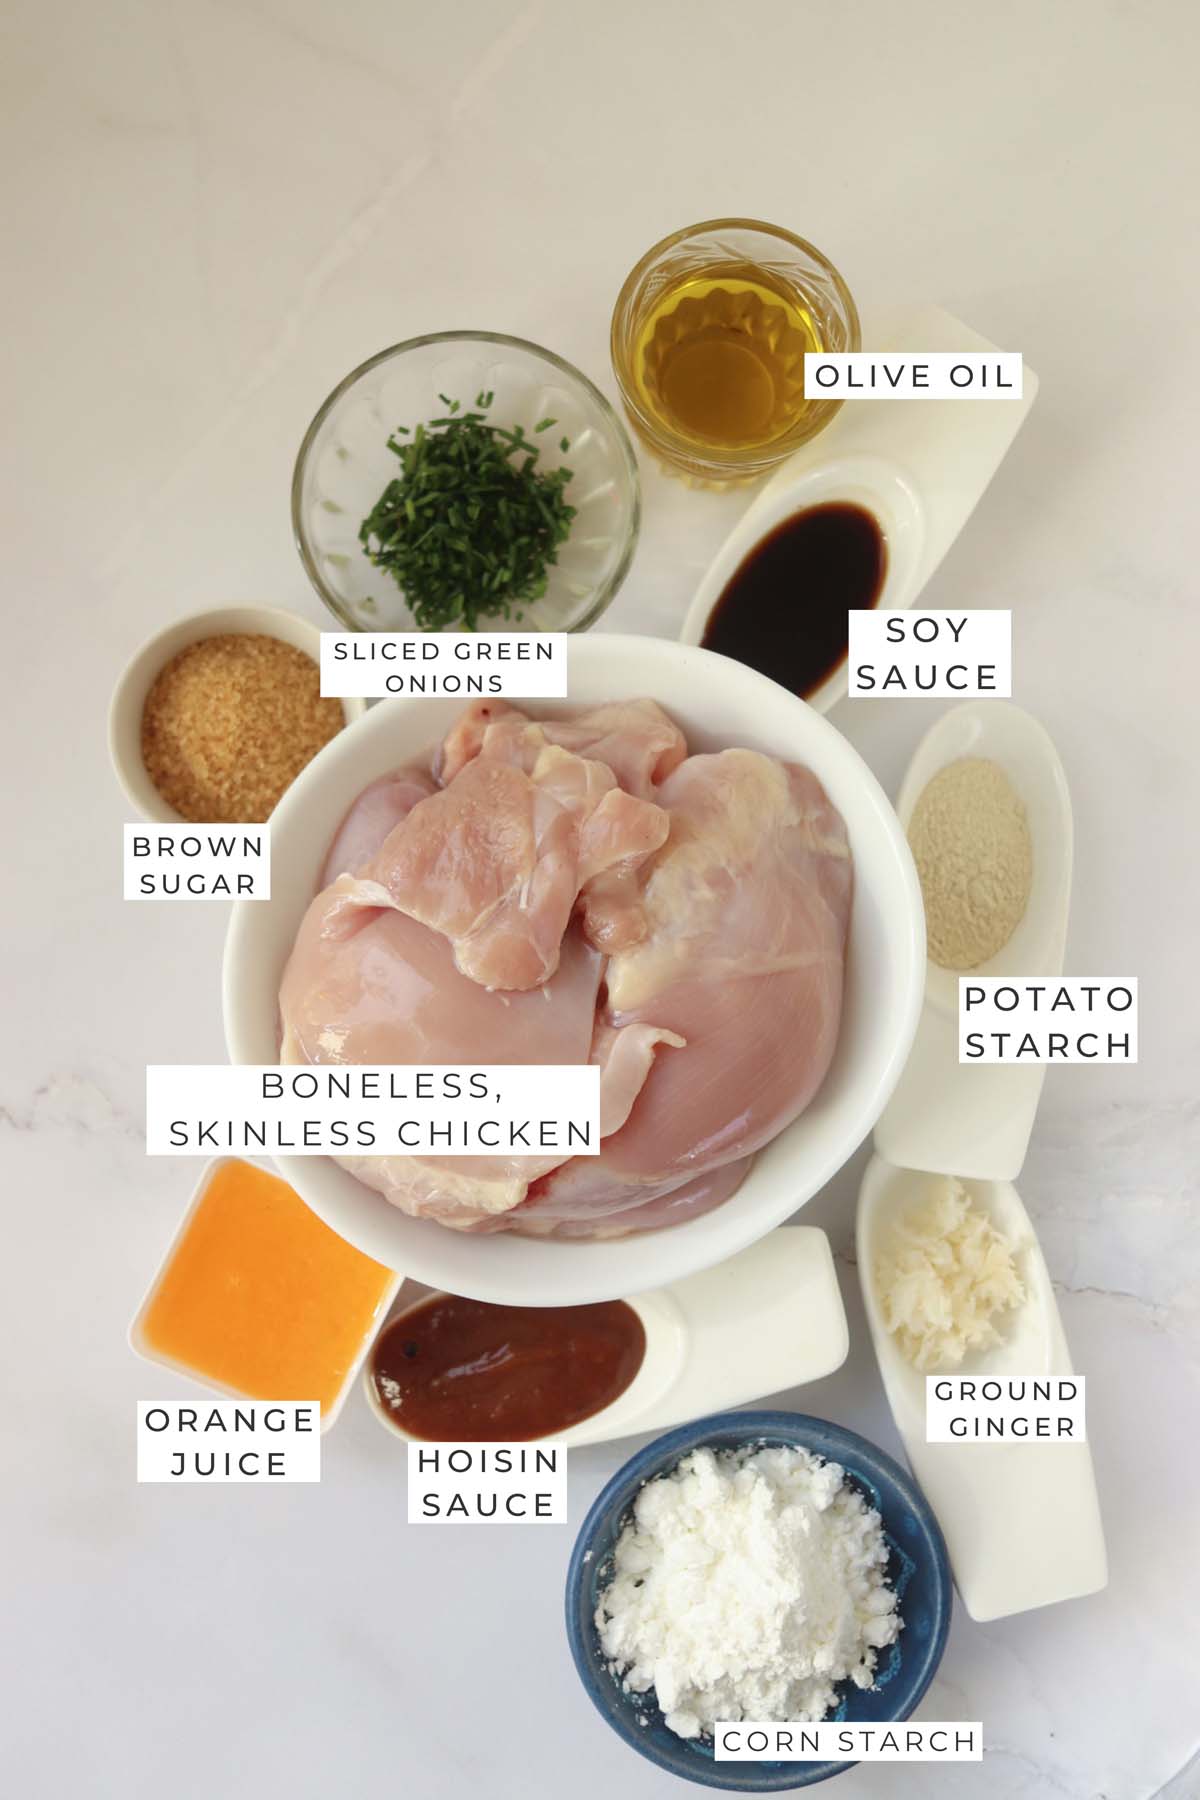 Labeled ingredients for the sesame chicken.